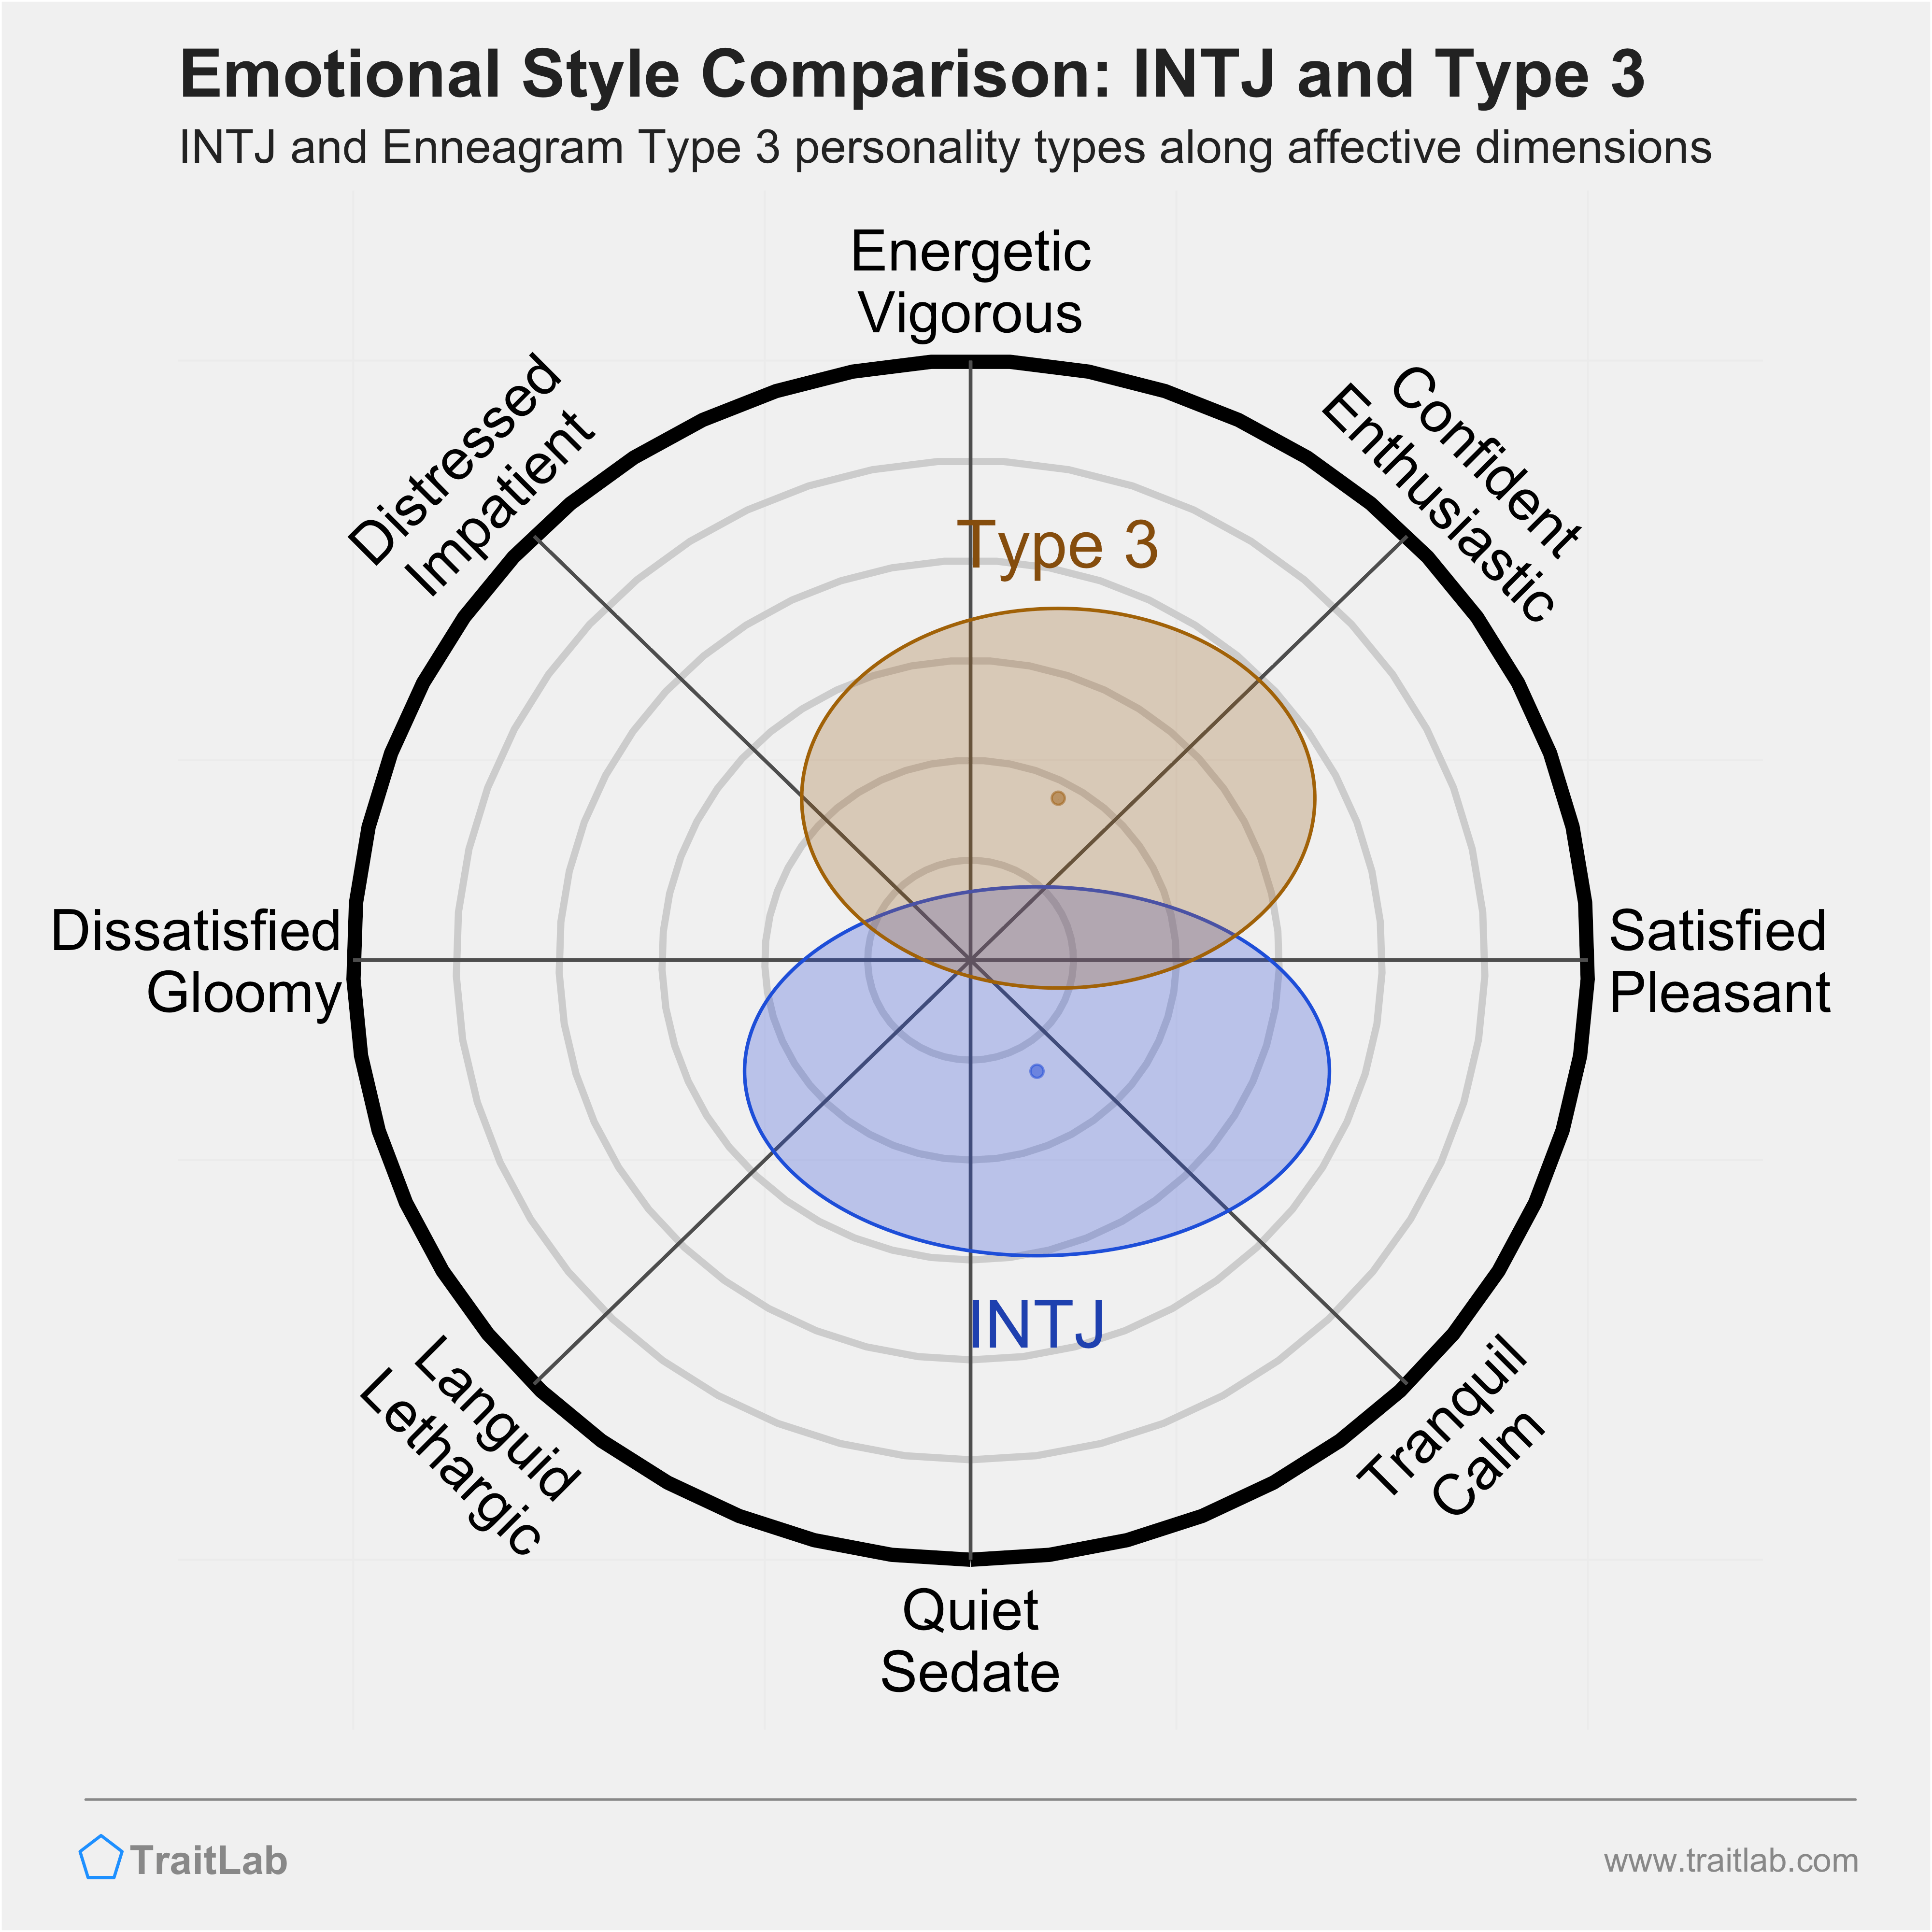 INTJ and Type 3 comparison across emotional (affective) dimensions